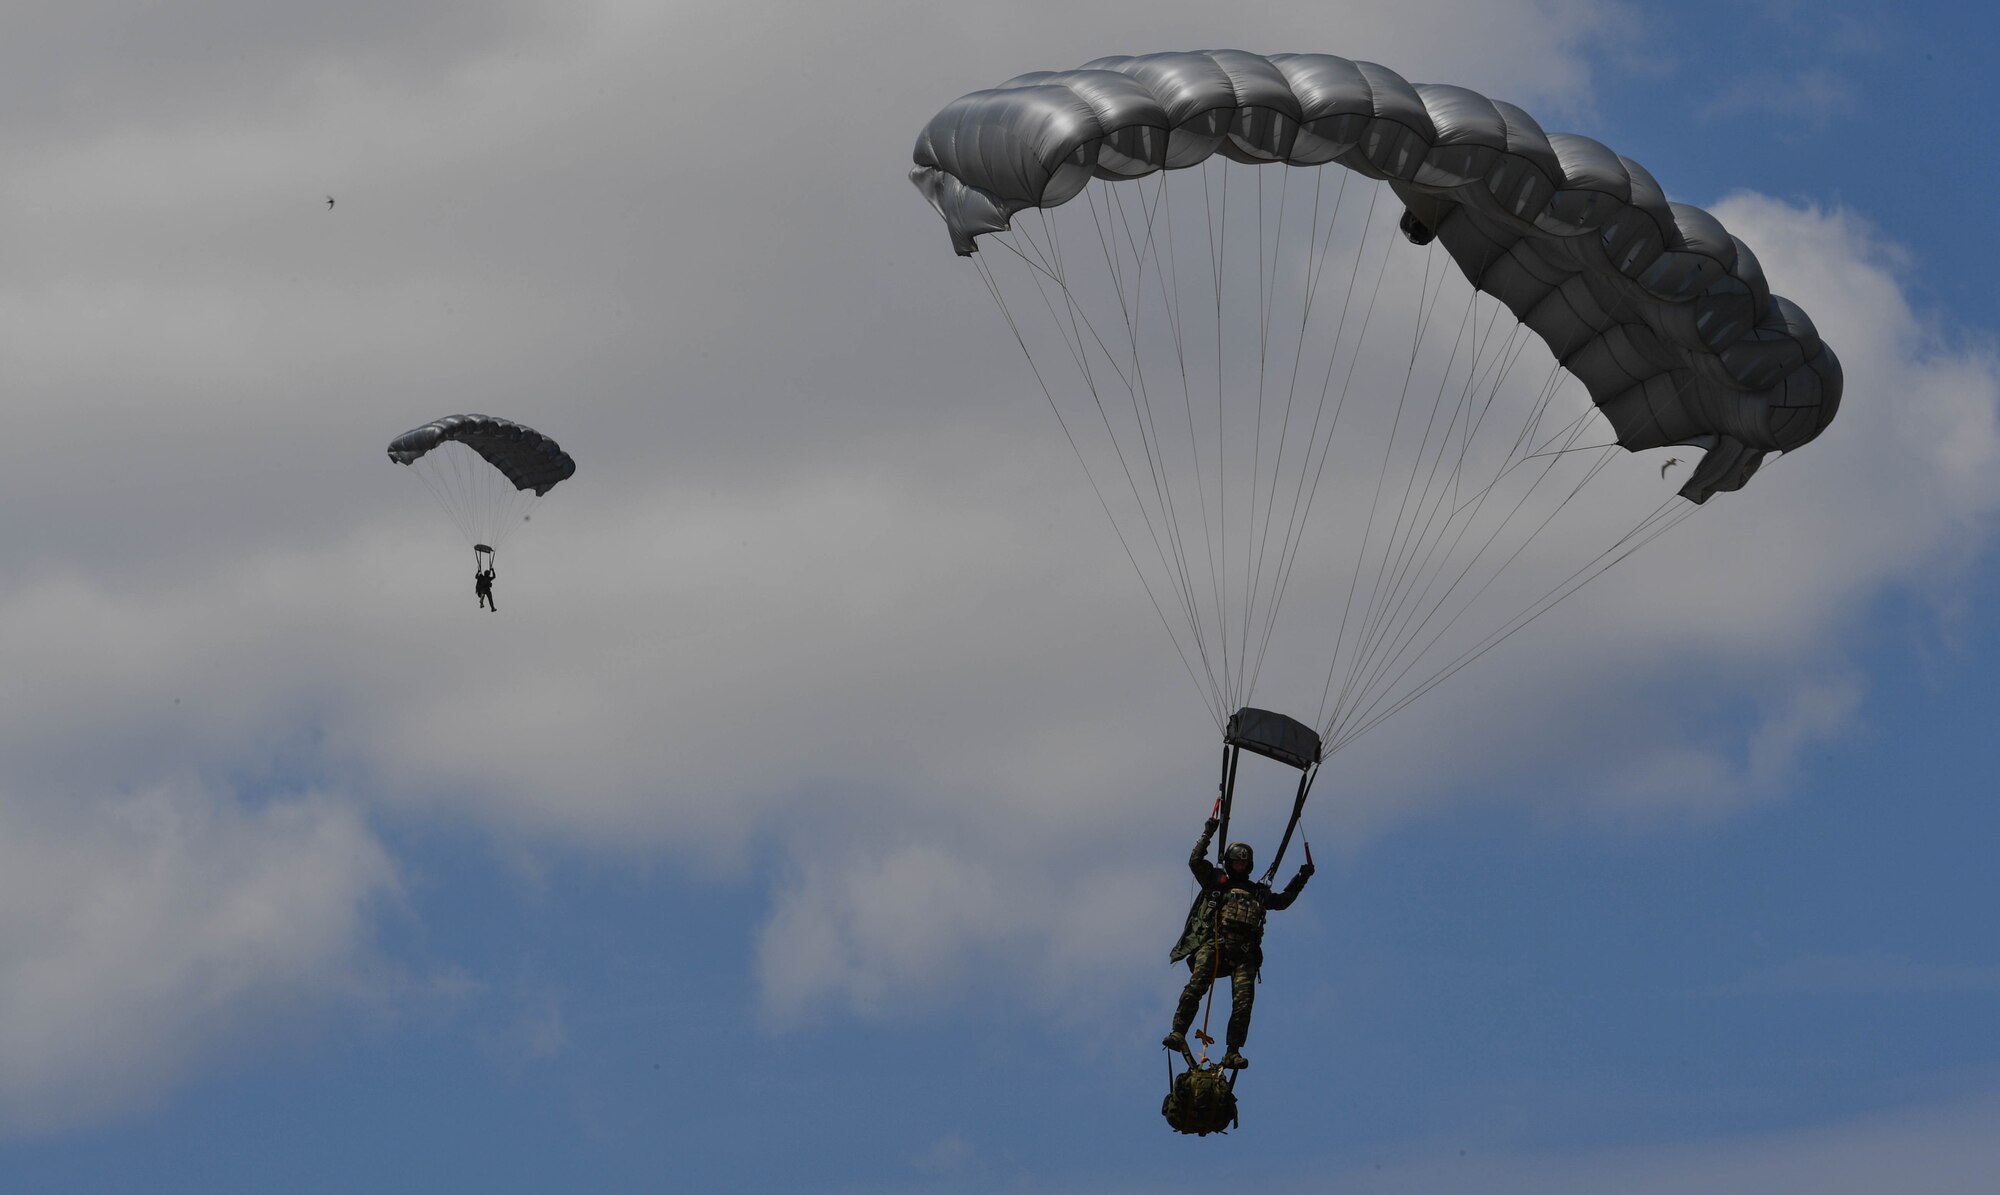 Two Greek paratroopers descend to the ground after conducting a military free-fall jump out of a U.S. Air Force C-130J Super Hercules during Exercise Stolen Cerberus IV above Megara, Greece, April 22, 2017. The U.S. Air Force and Army have worked alongside the Hellenic air force to perform personnel and cargo drops throughout the exercise. The purpose of the exercise was to train U.S. and Greek forces while strengthening the partnership between two NATO allies. (U.S Air Force photo by Senior Airman Tryphena Mayhugh)